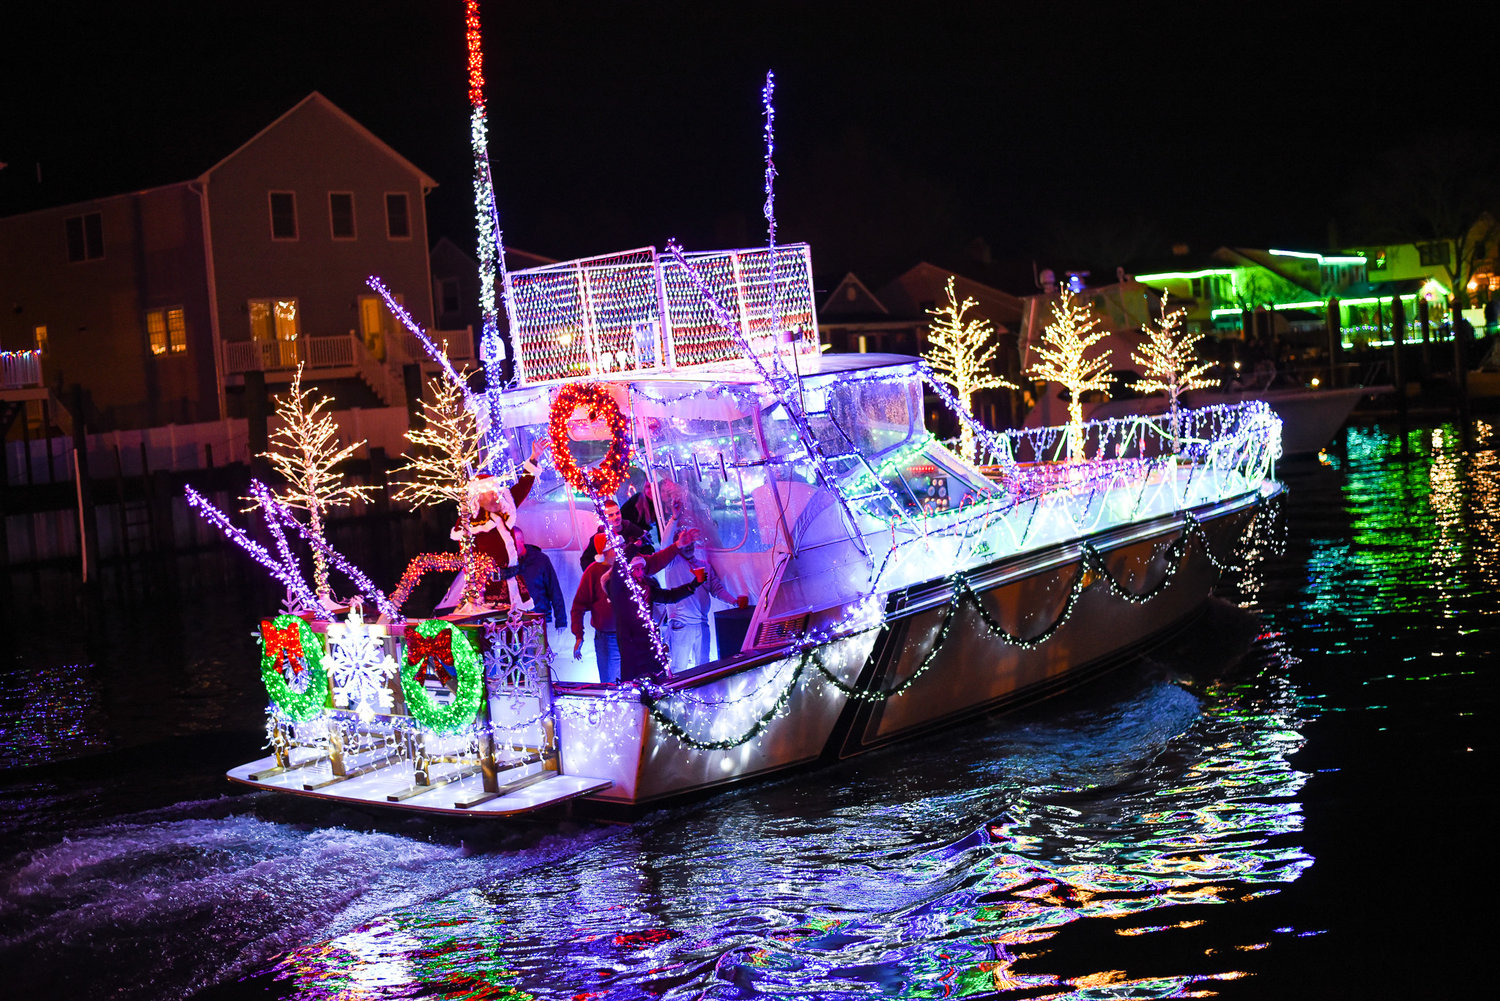 Several dozen boats lit up the Nautical Mile and spread holiday cheer participating in the boat show.